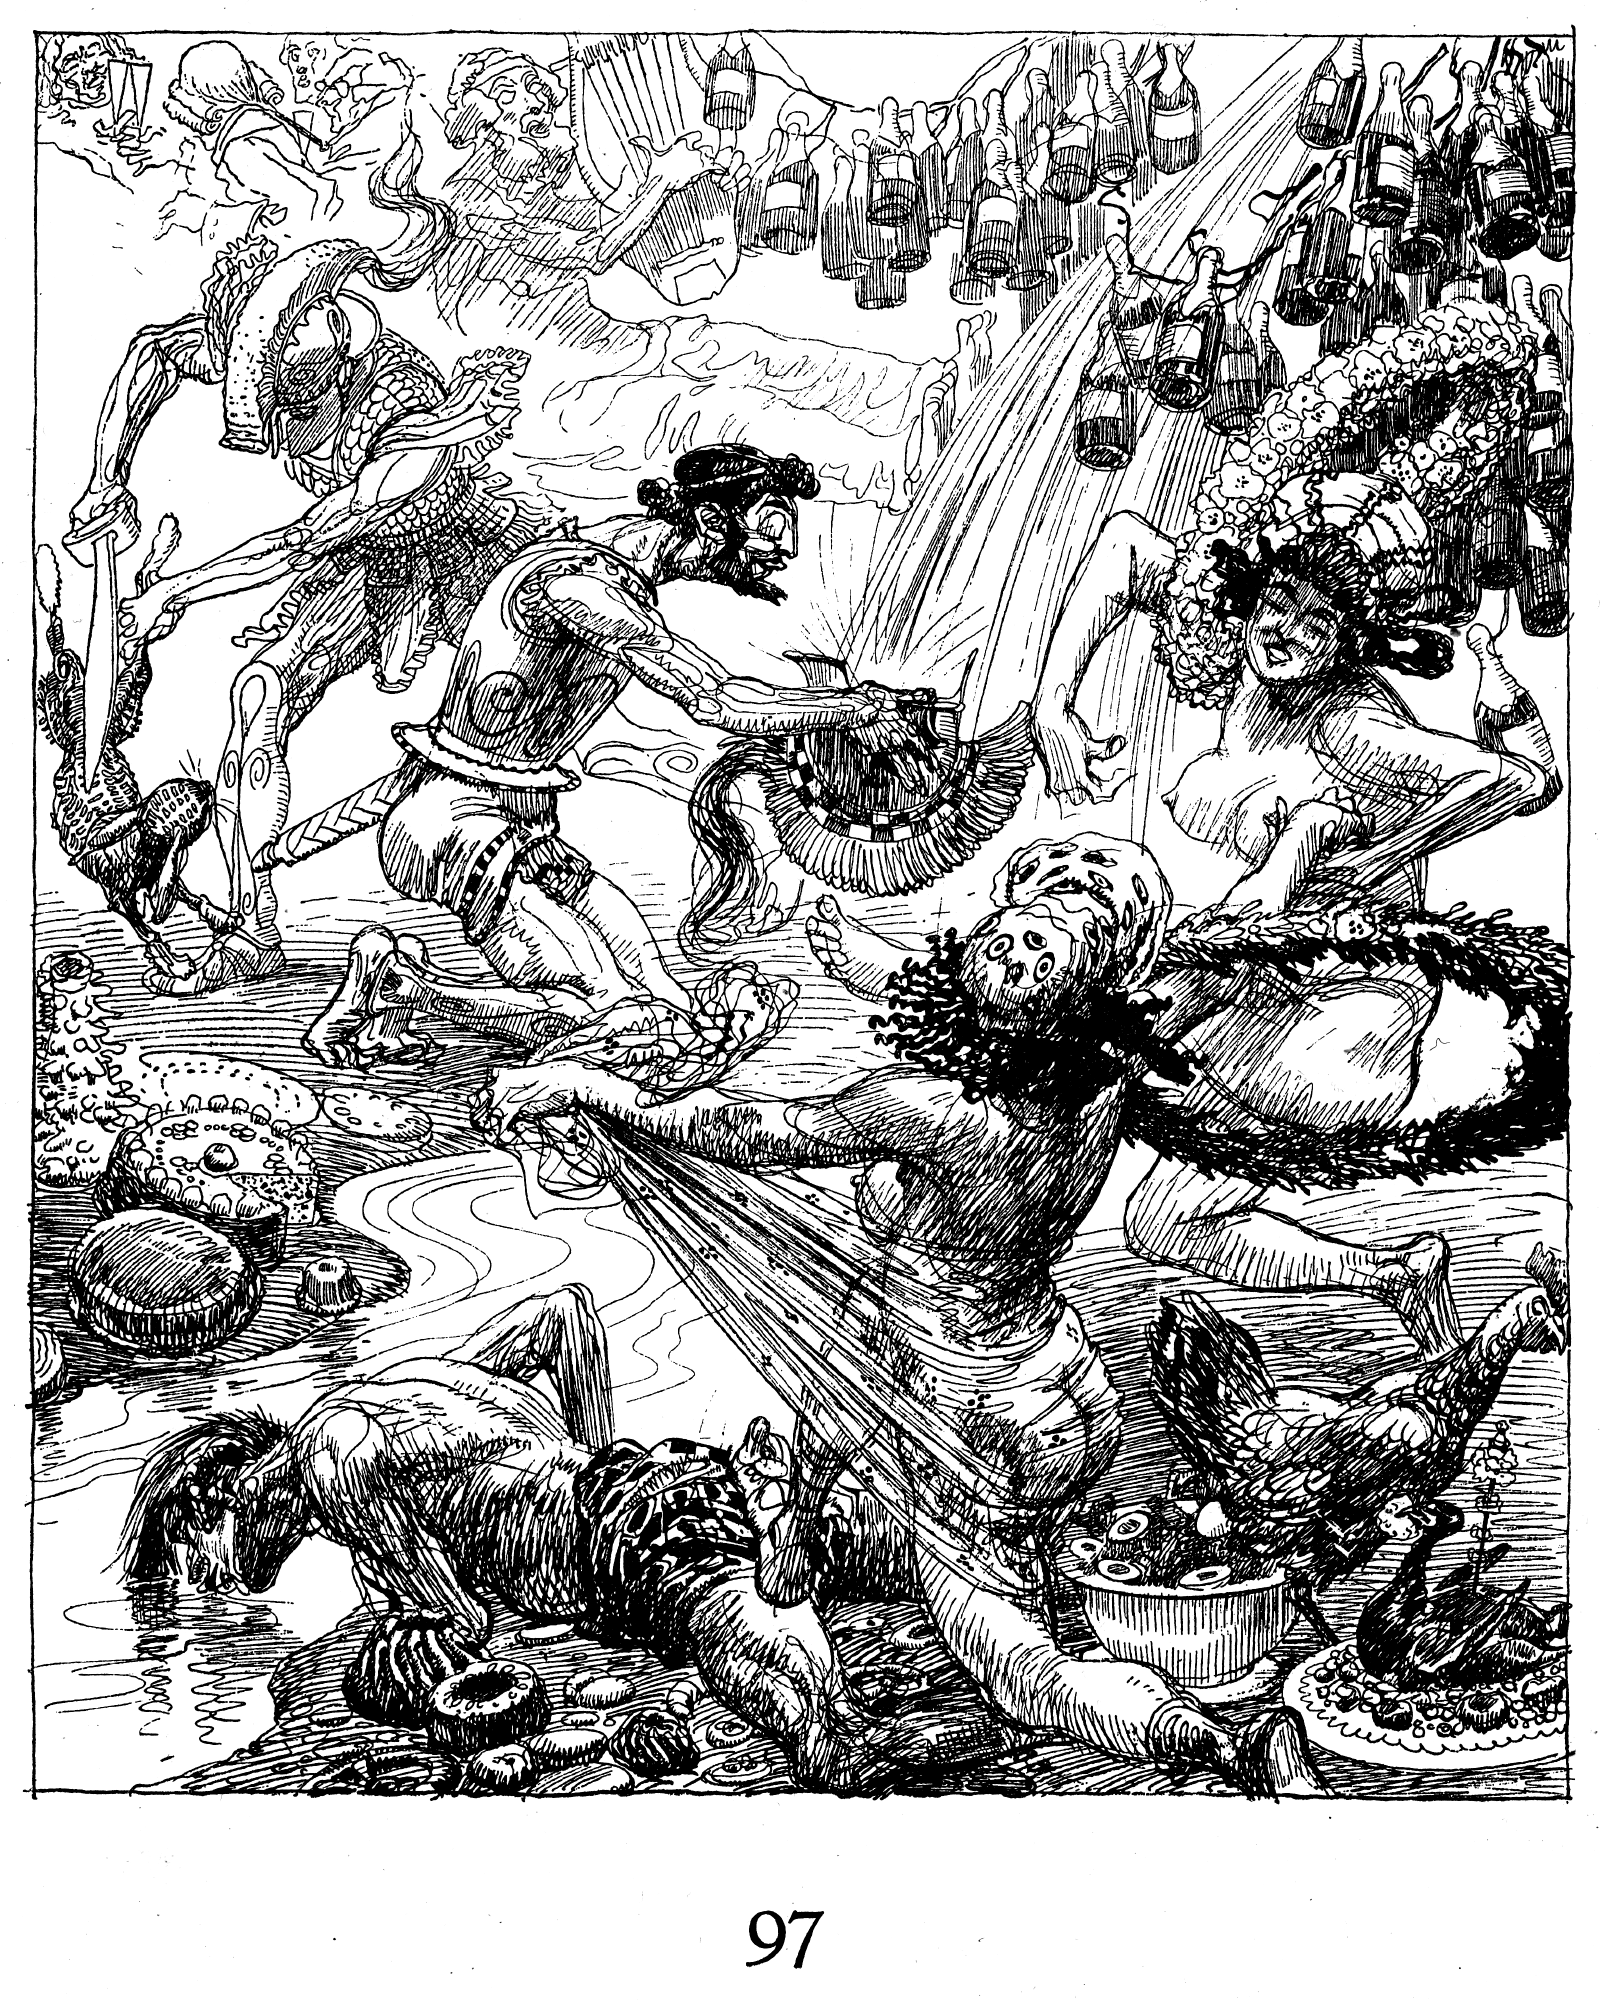 scans from the book Vergil Aeneis with Heinrich Kley illustrations